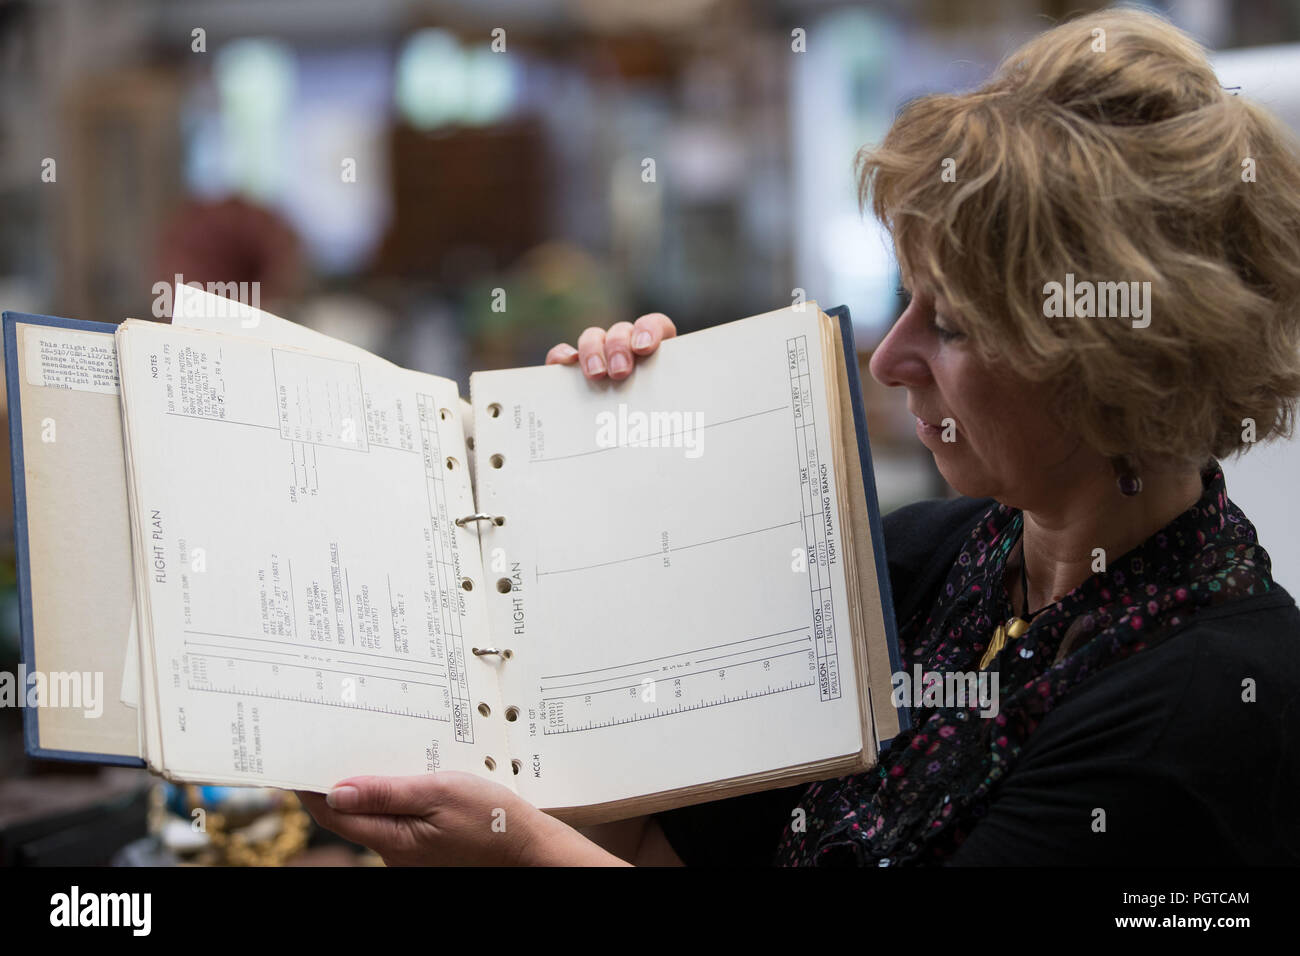 Jill Gallone, head of media and advertising at Hansons Auctioneers in Derbyshire, holds the Apollo 15 Flight Plan. A space exploration collection is set to go to auction which includes items from the Apollo space missions. Stock Photo